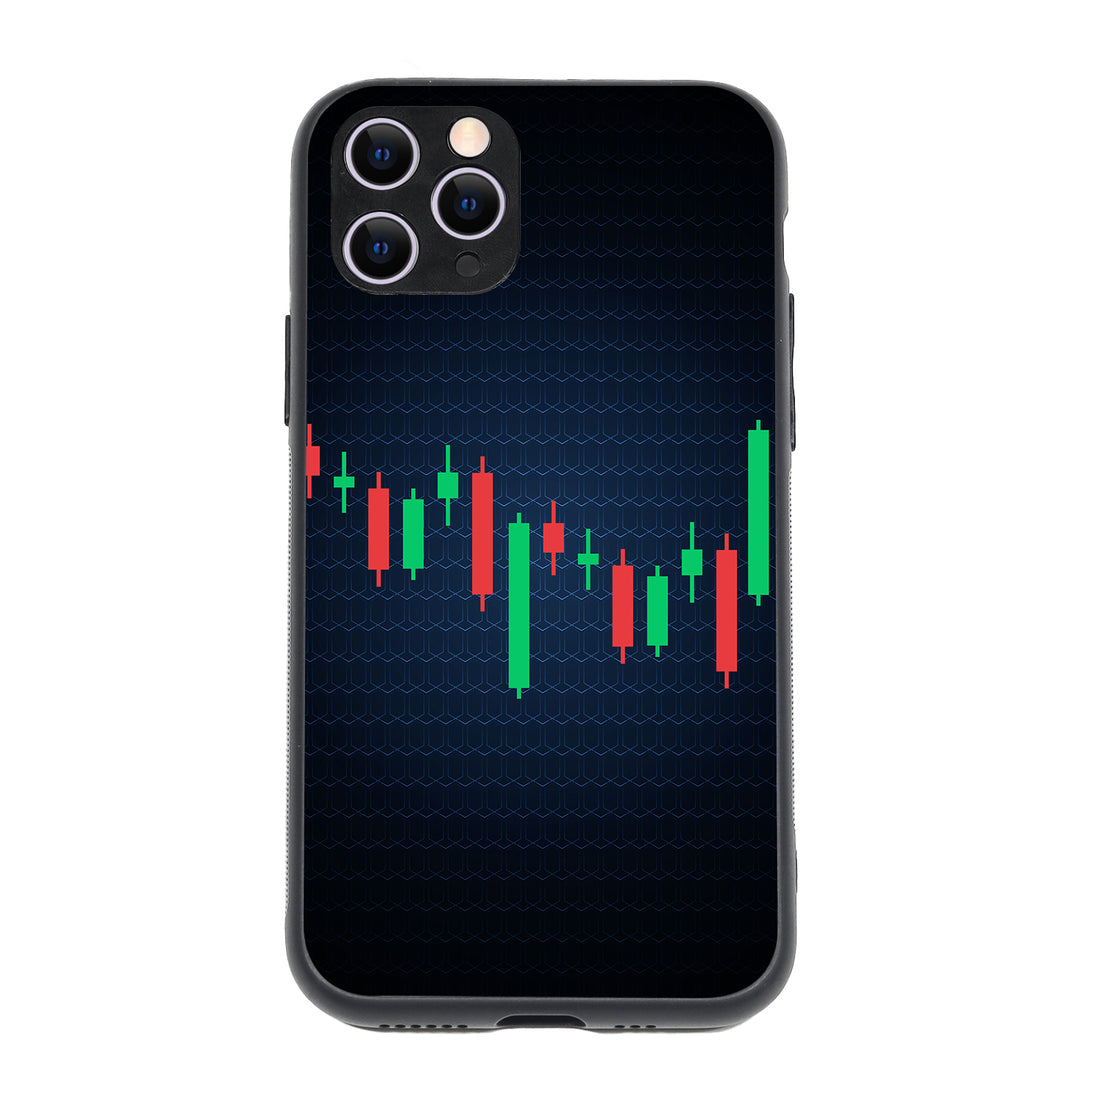 Candlestick Trading iPhone 11 Pro Case